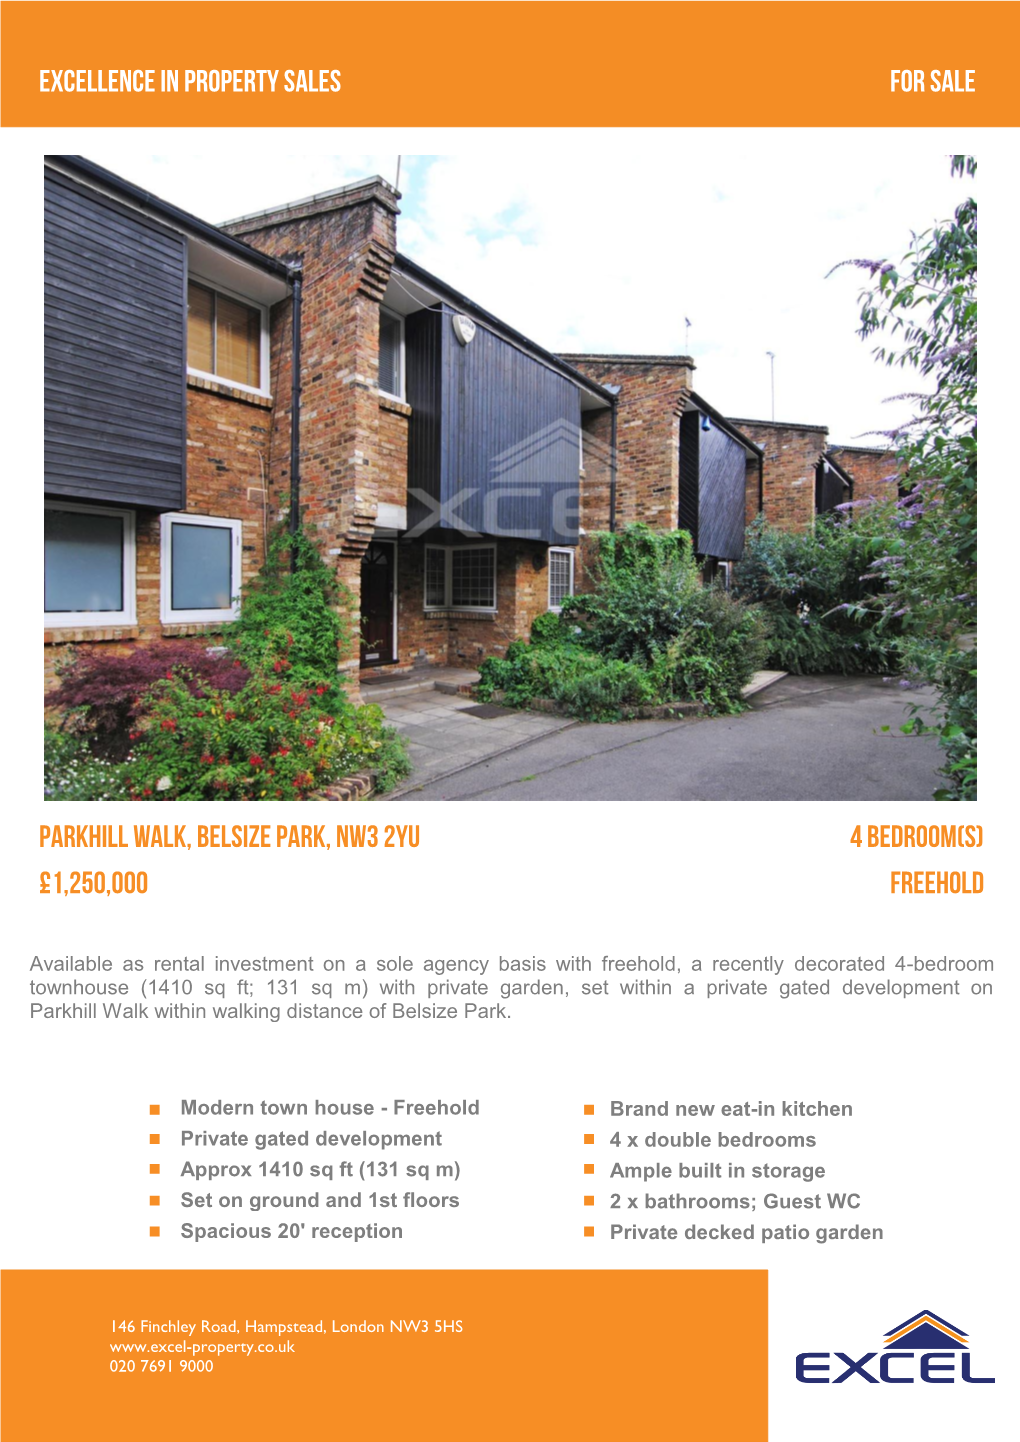 £1,250,000 Excellence in Property Sales for Sale